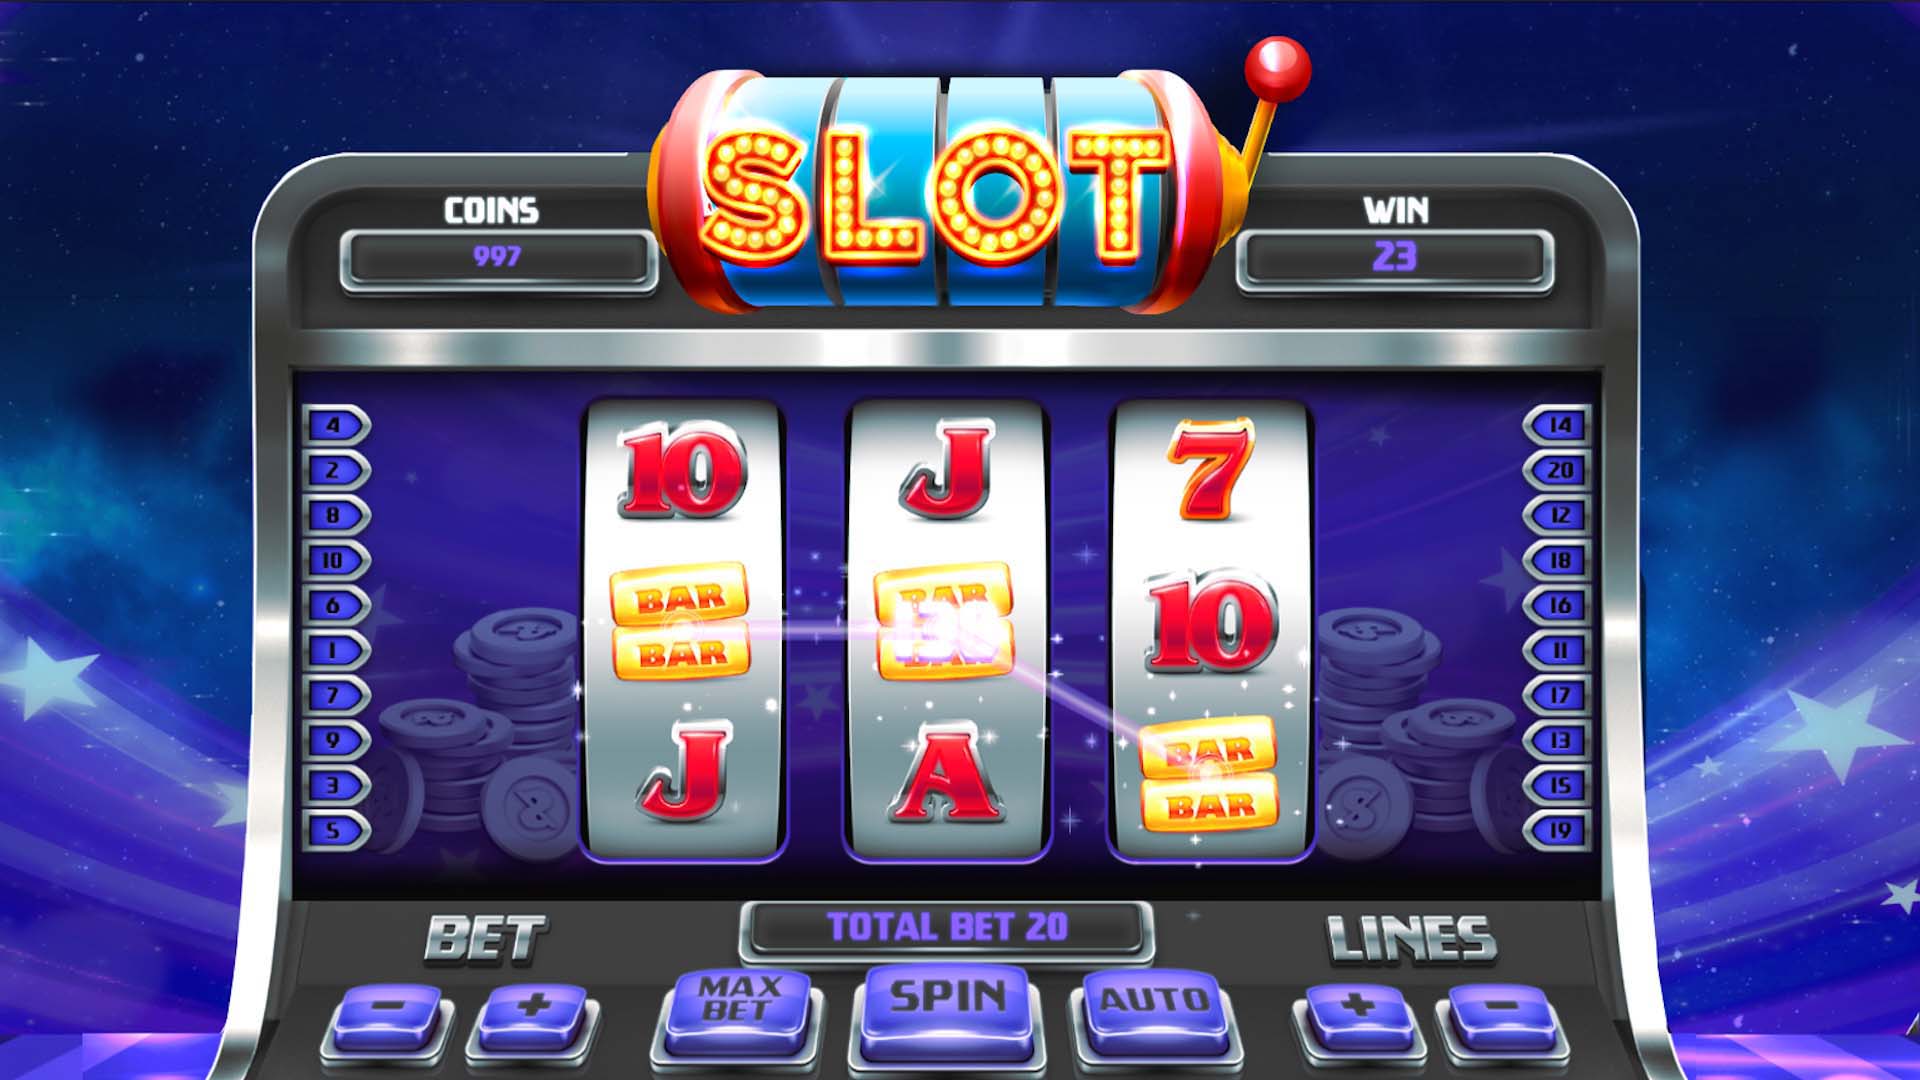 Tips For Improving Your Odds In Slot Machine Games